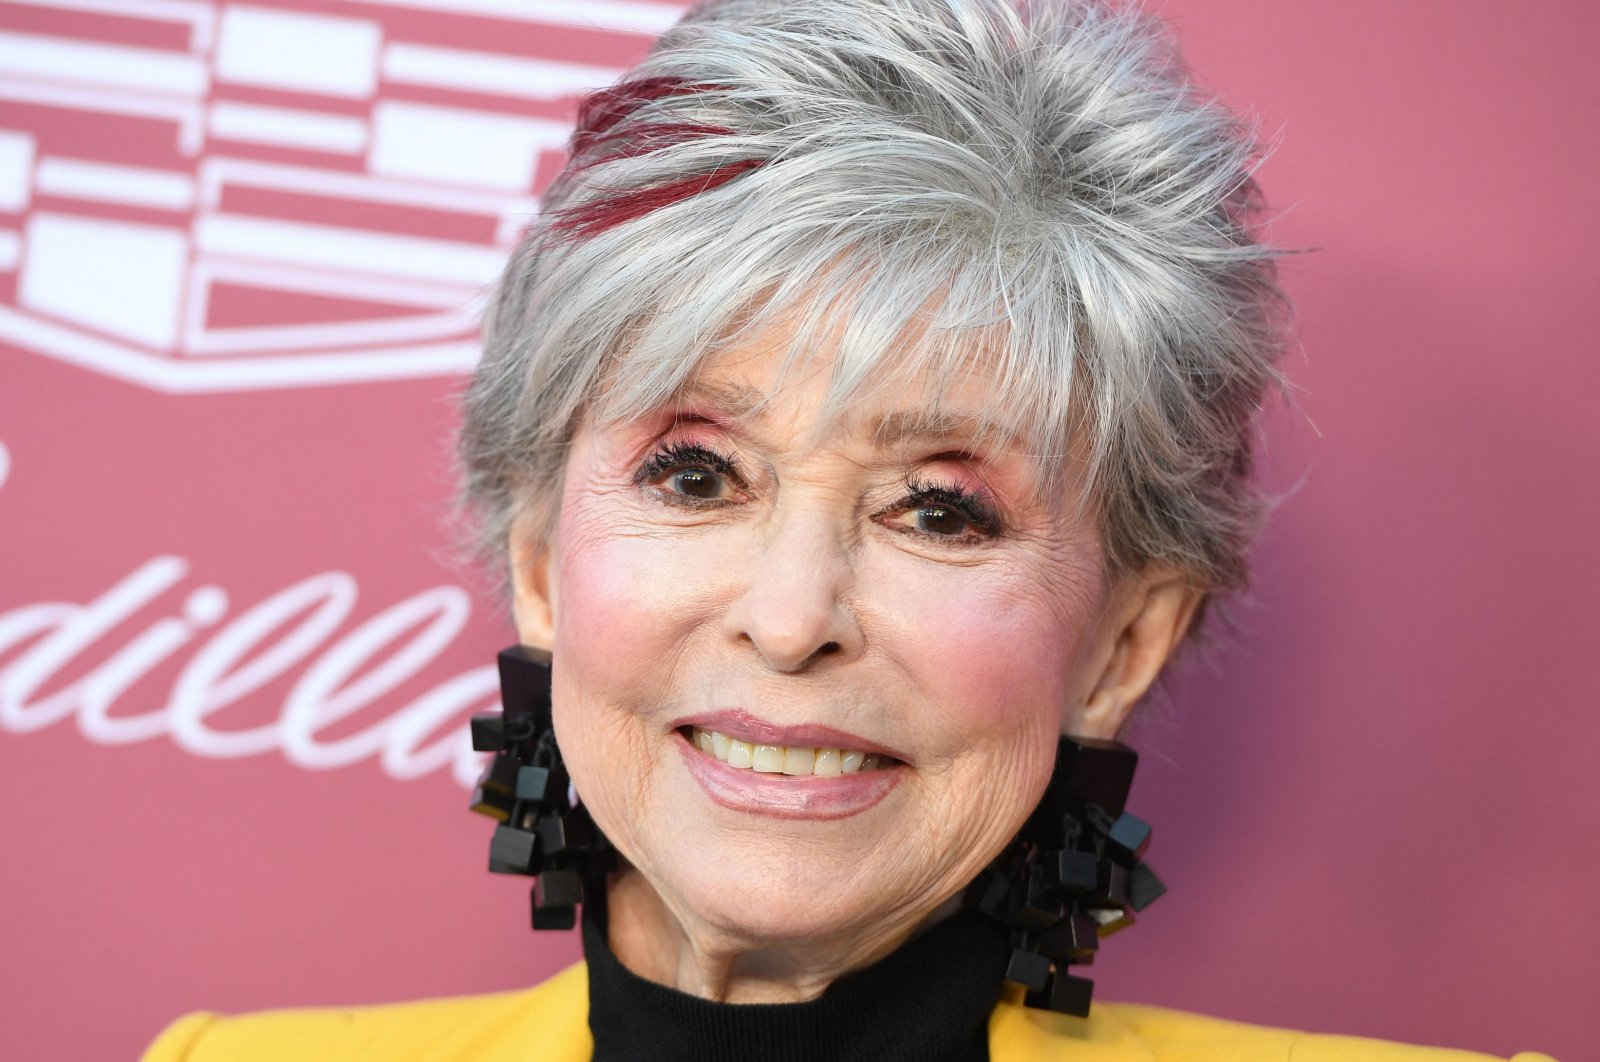 Puerto Rican actress Rita Moreno attends Variety’s &quot;2021 Power of Women: Los Angeles Event&quot; at the Wallis Annenberg Center for the Performing Arts in Beverly Hills, California, U.S., Sept. 30, 2021. (AFP Photo)